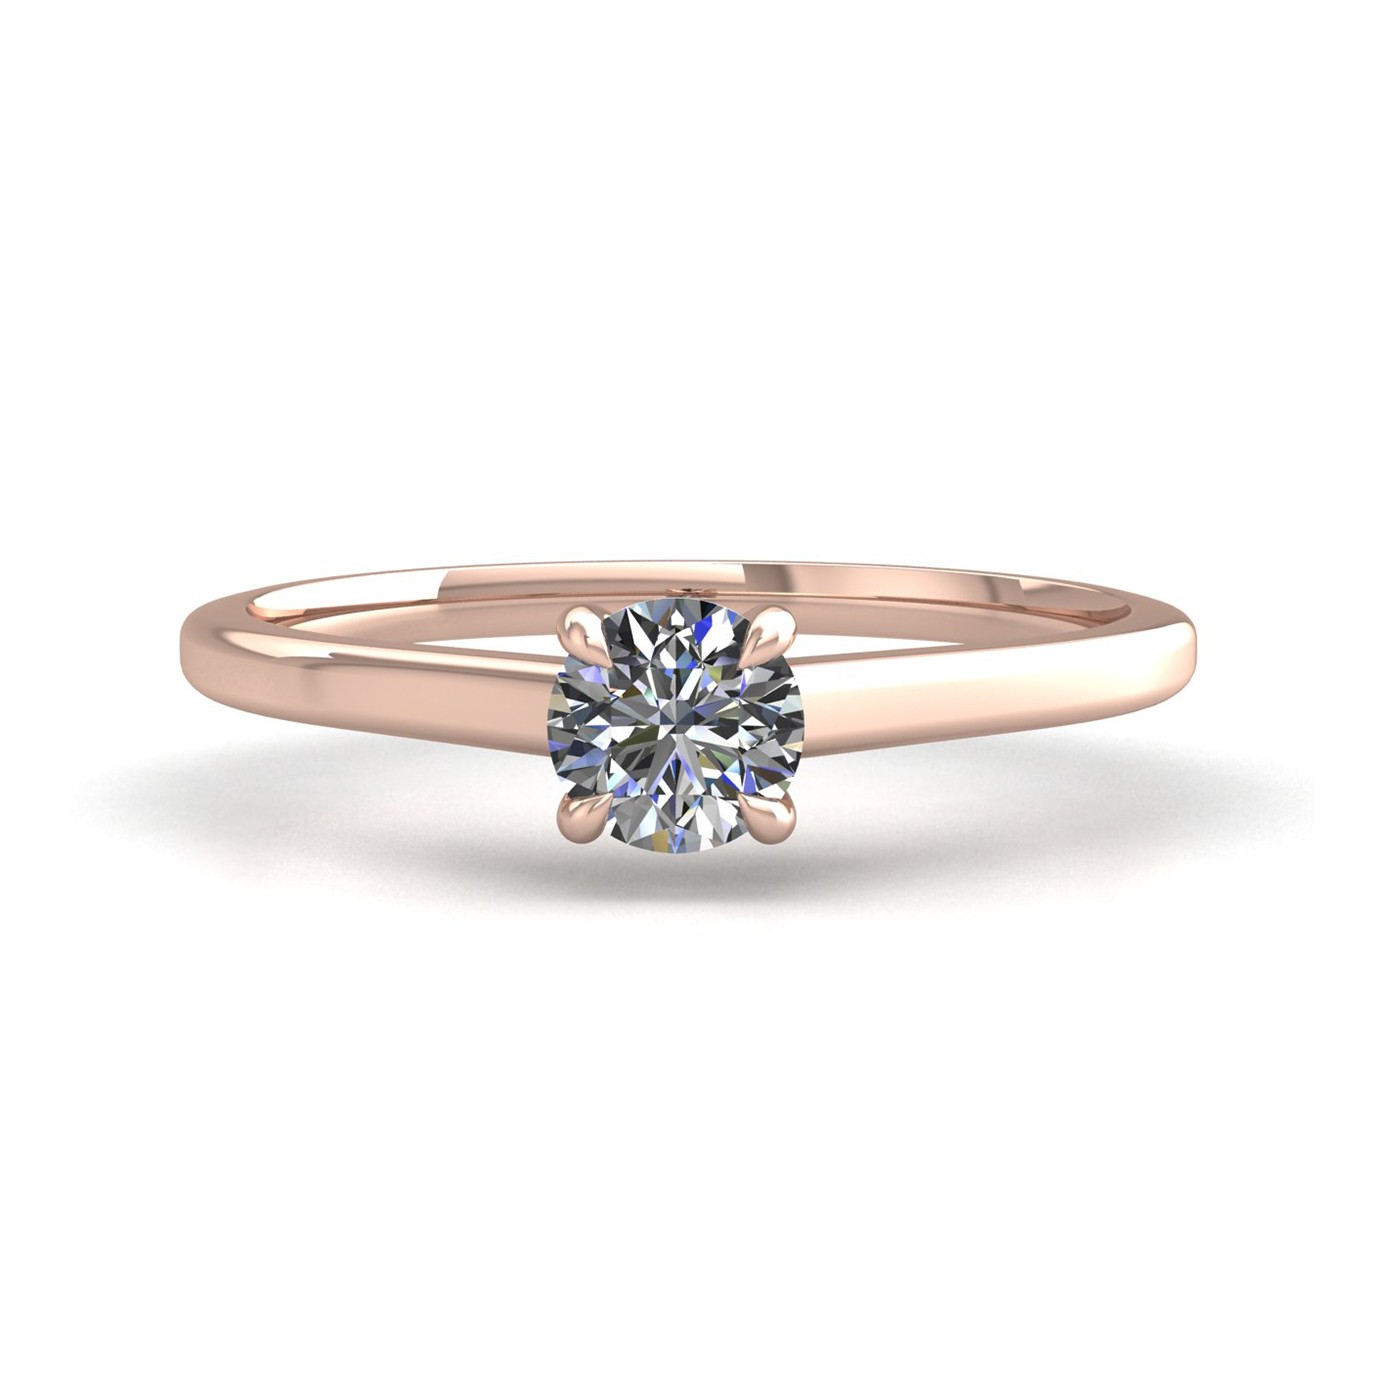 18k rose gold  0,30 ct 4 prongs solitaire round cut diamond engagement ring with whisper thin band